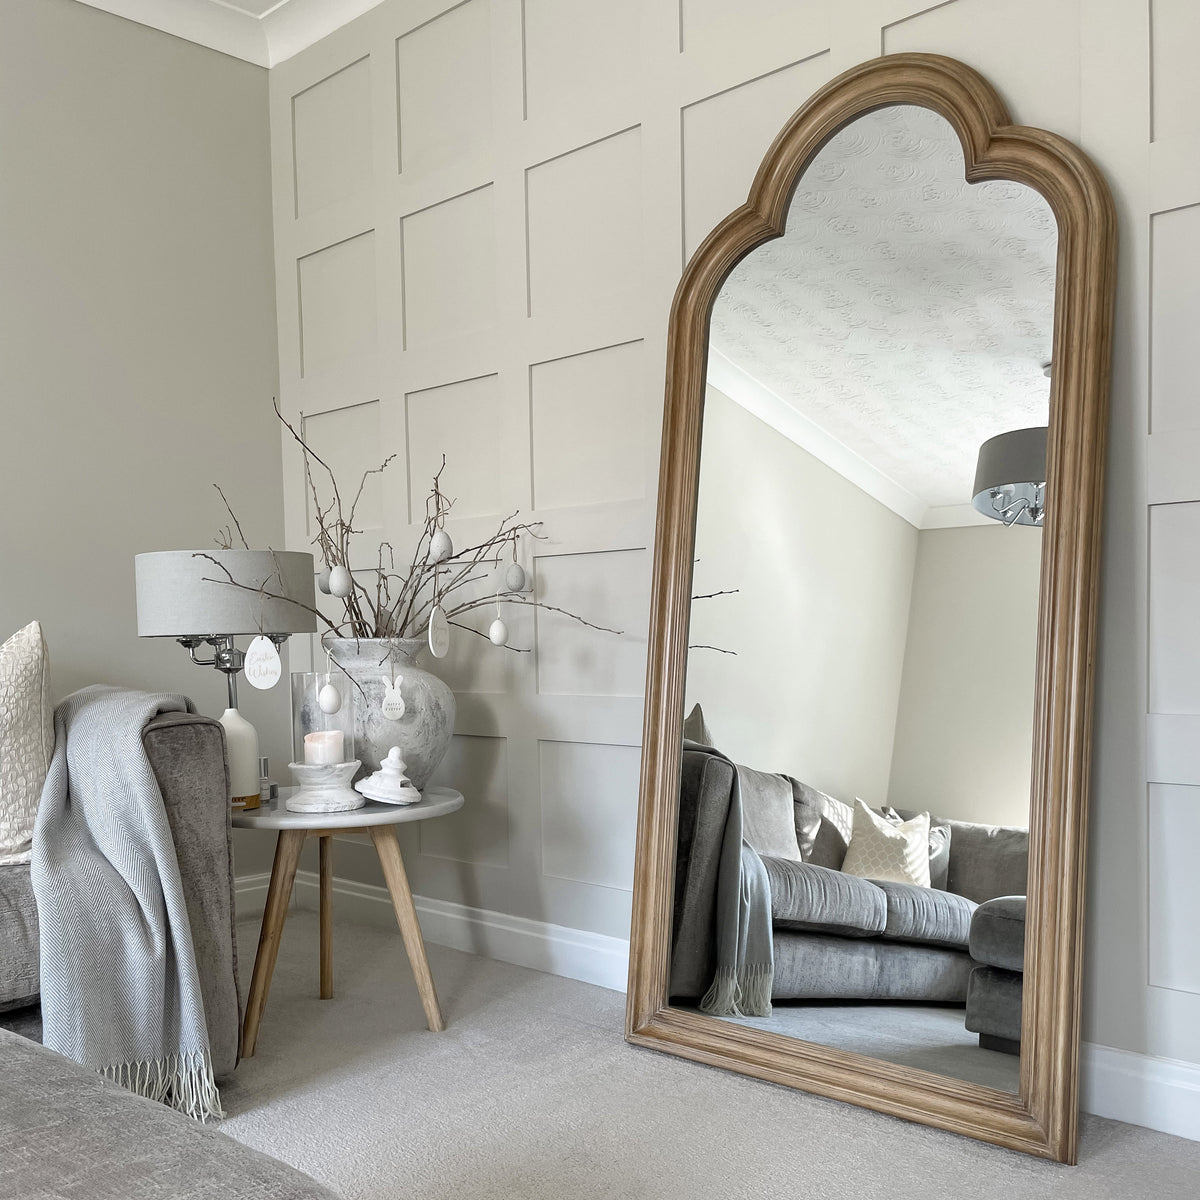 Washed Wood Arched Full Length Mirror in living room